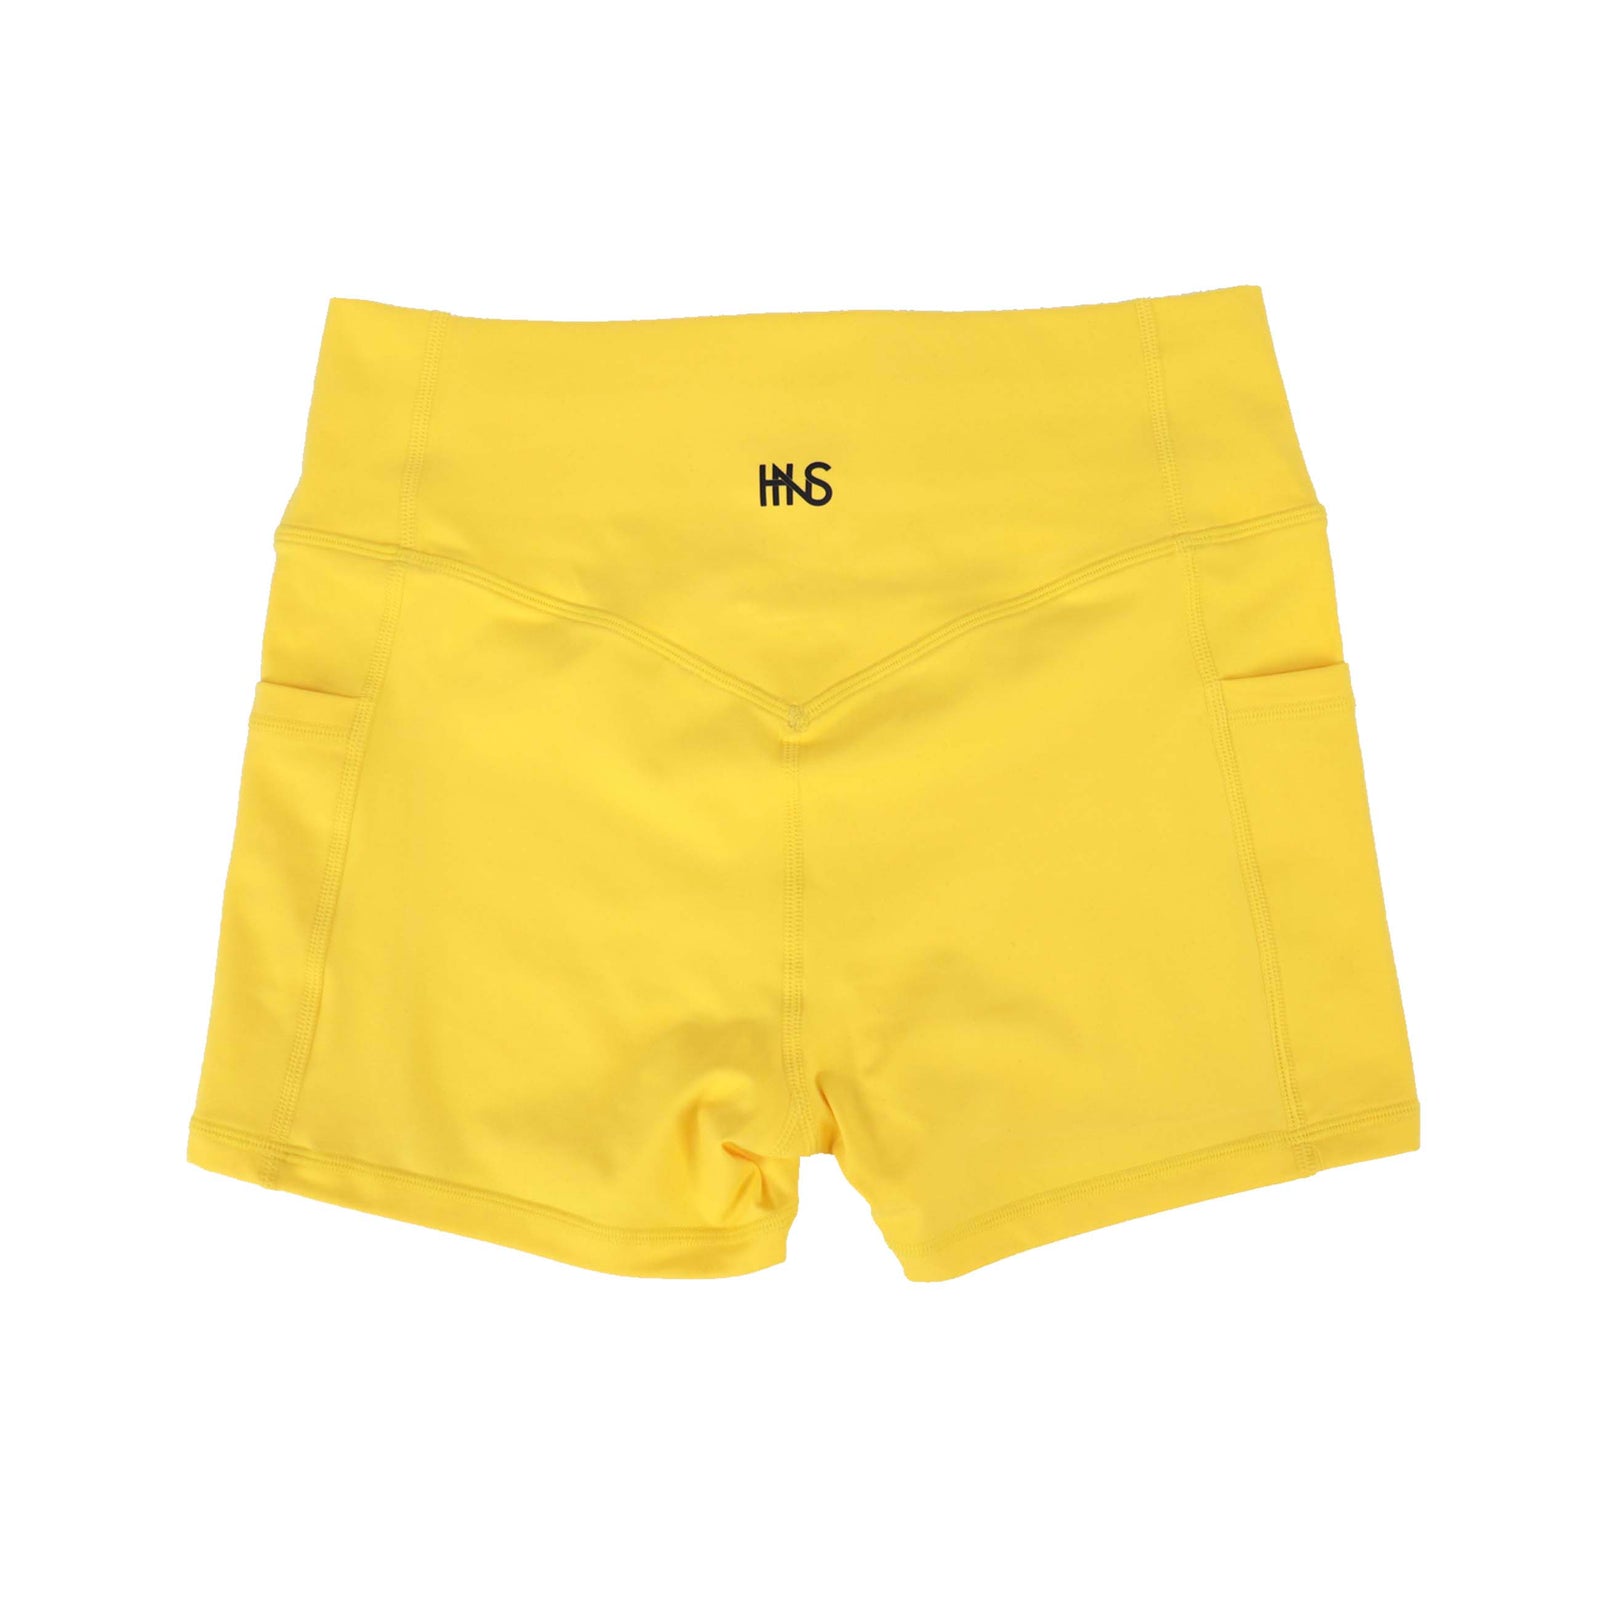 Woman's Athletic Shorts - H.N.S Apparel